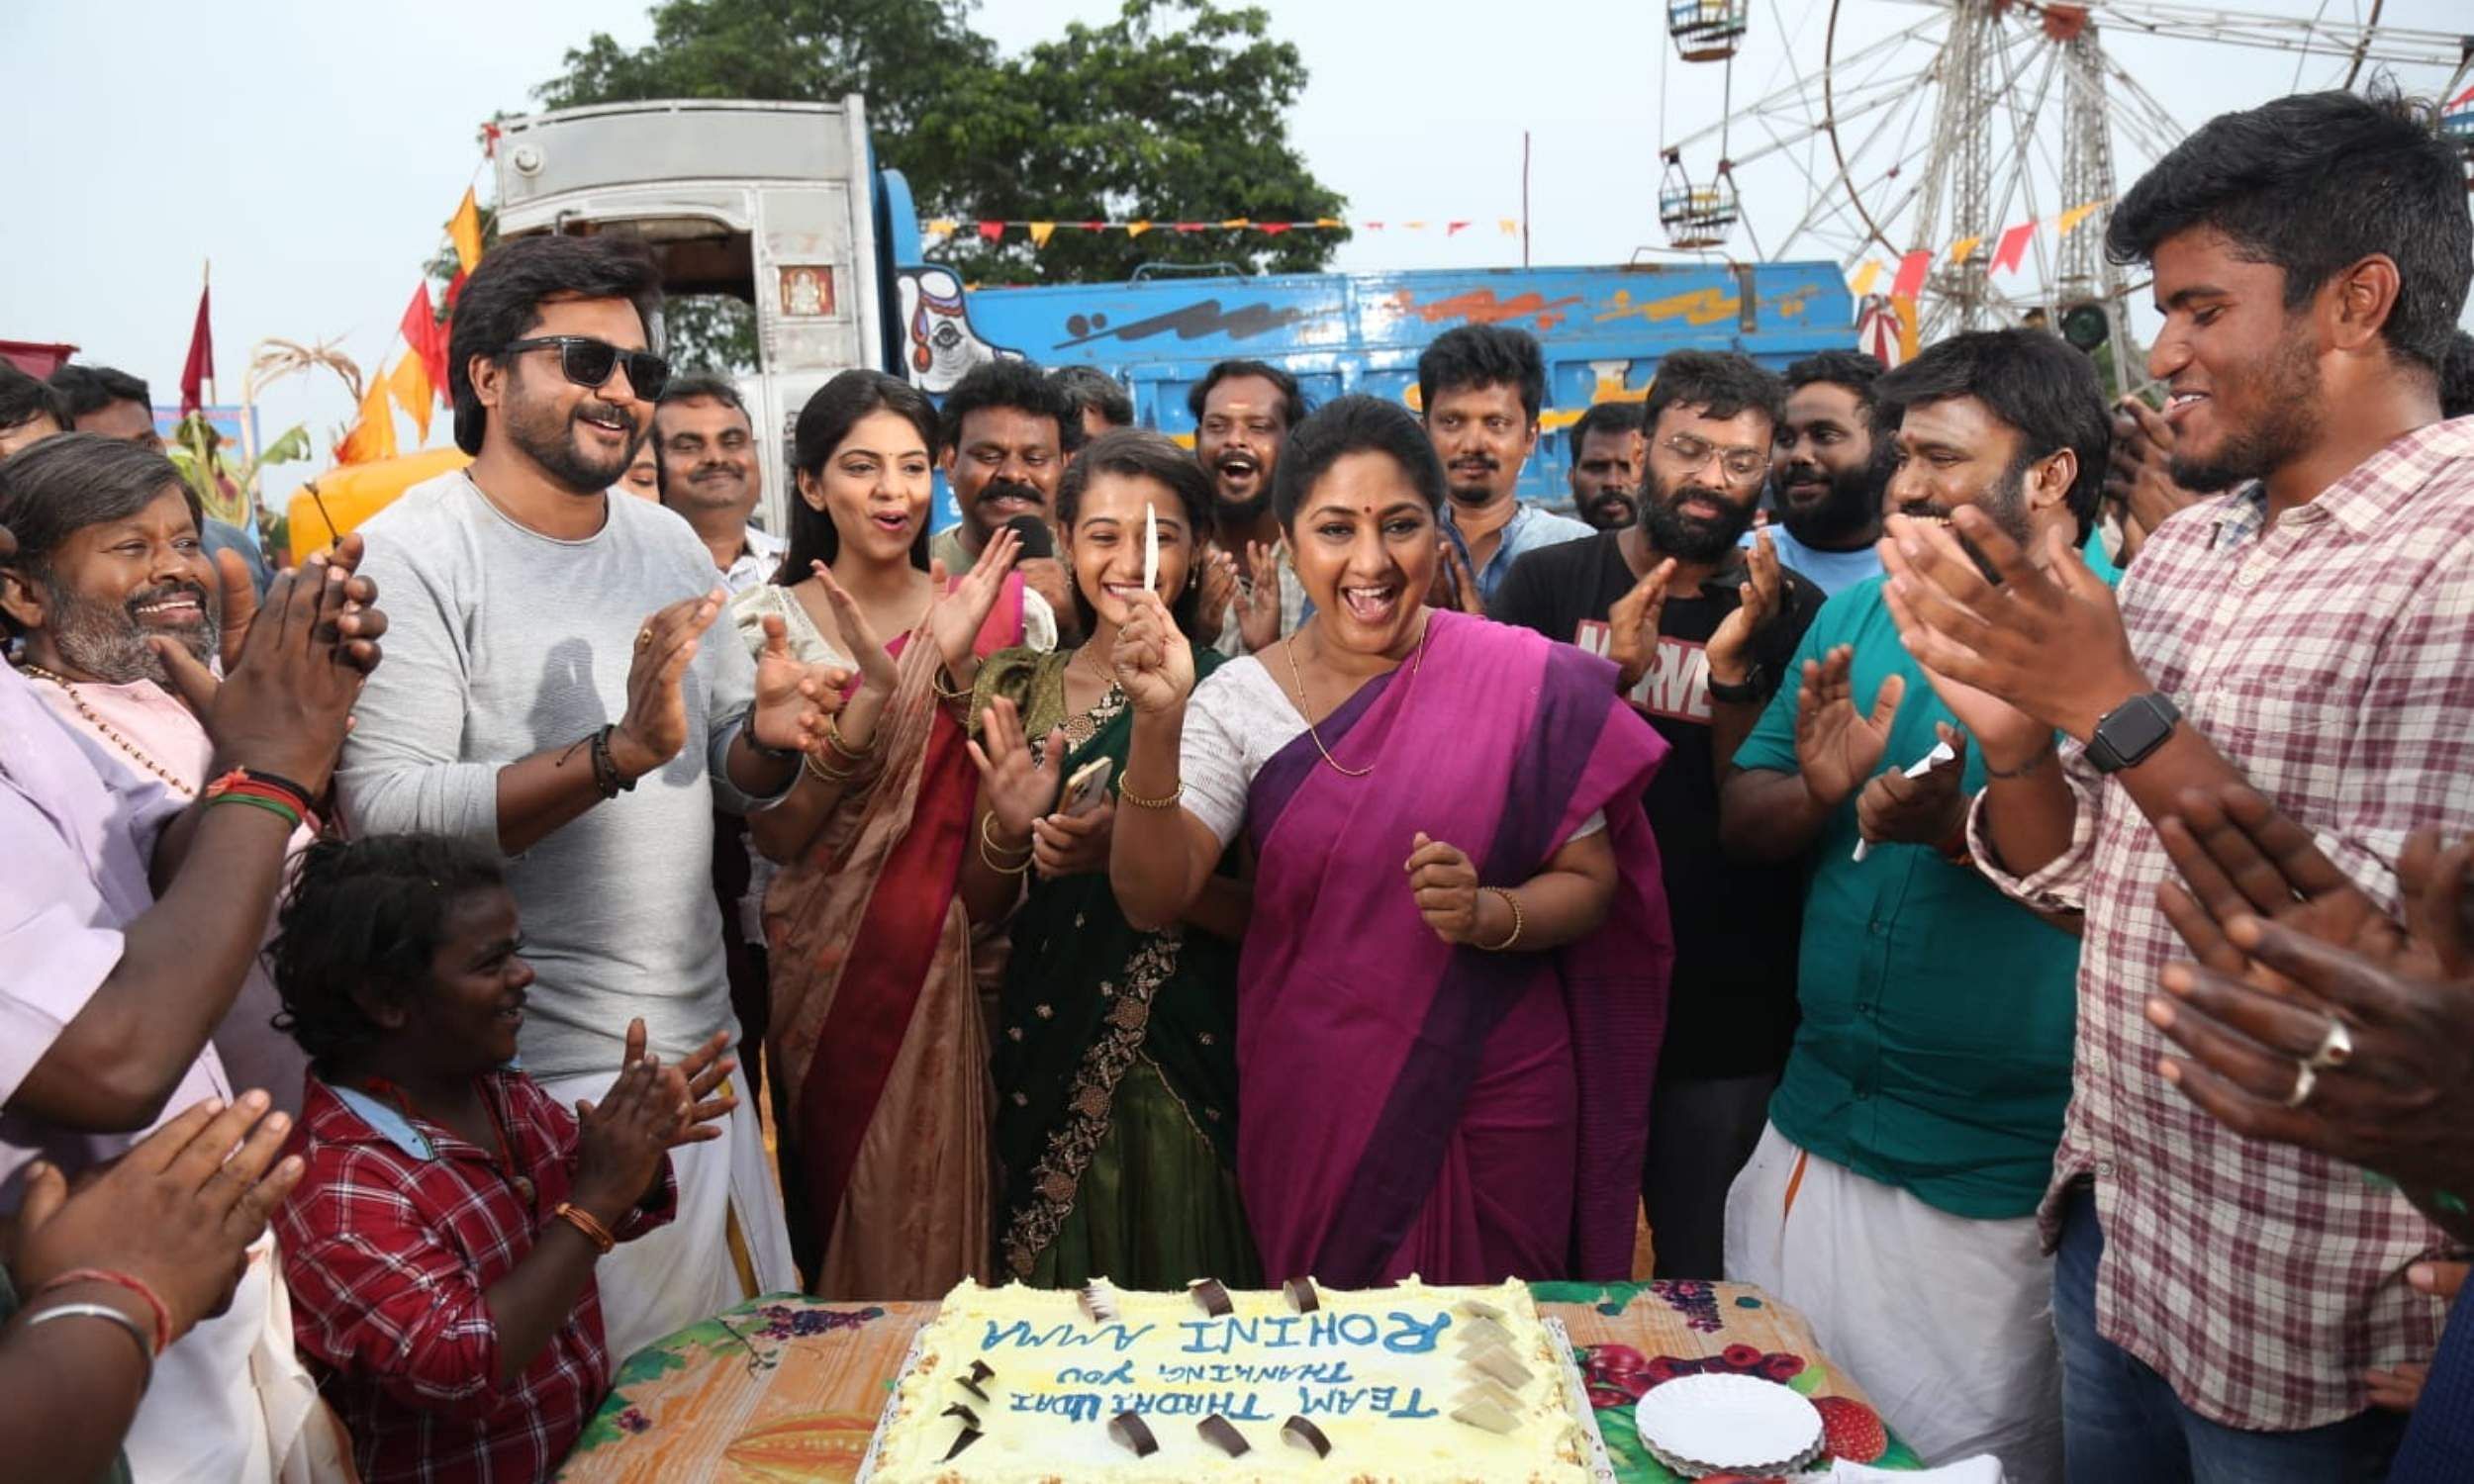 Rohini wraps up her portions for Bobby Simha’s upcoming film Thadai Udai